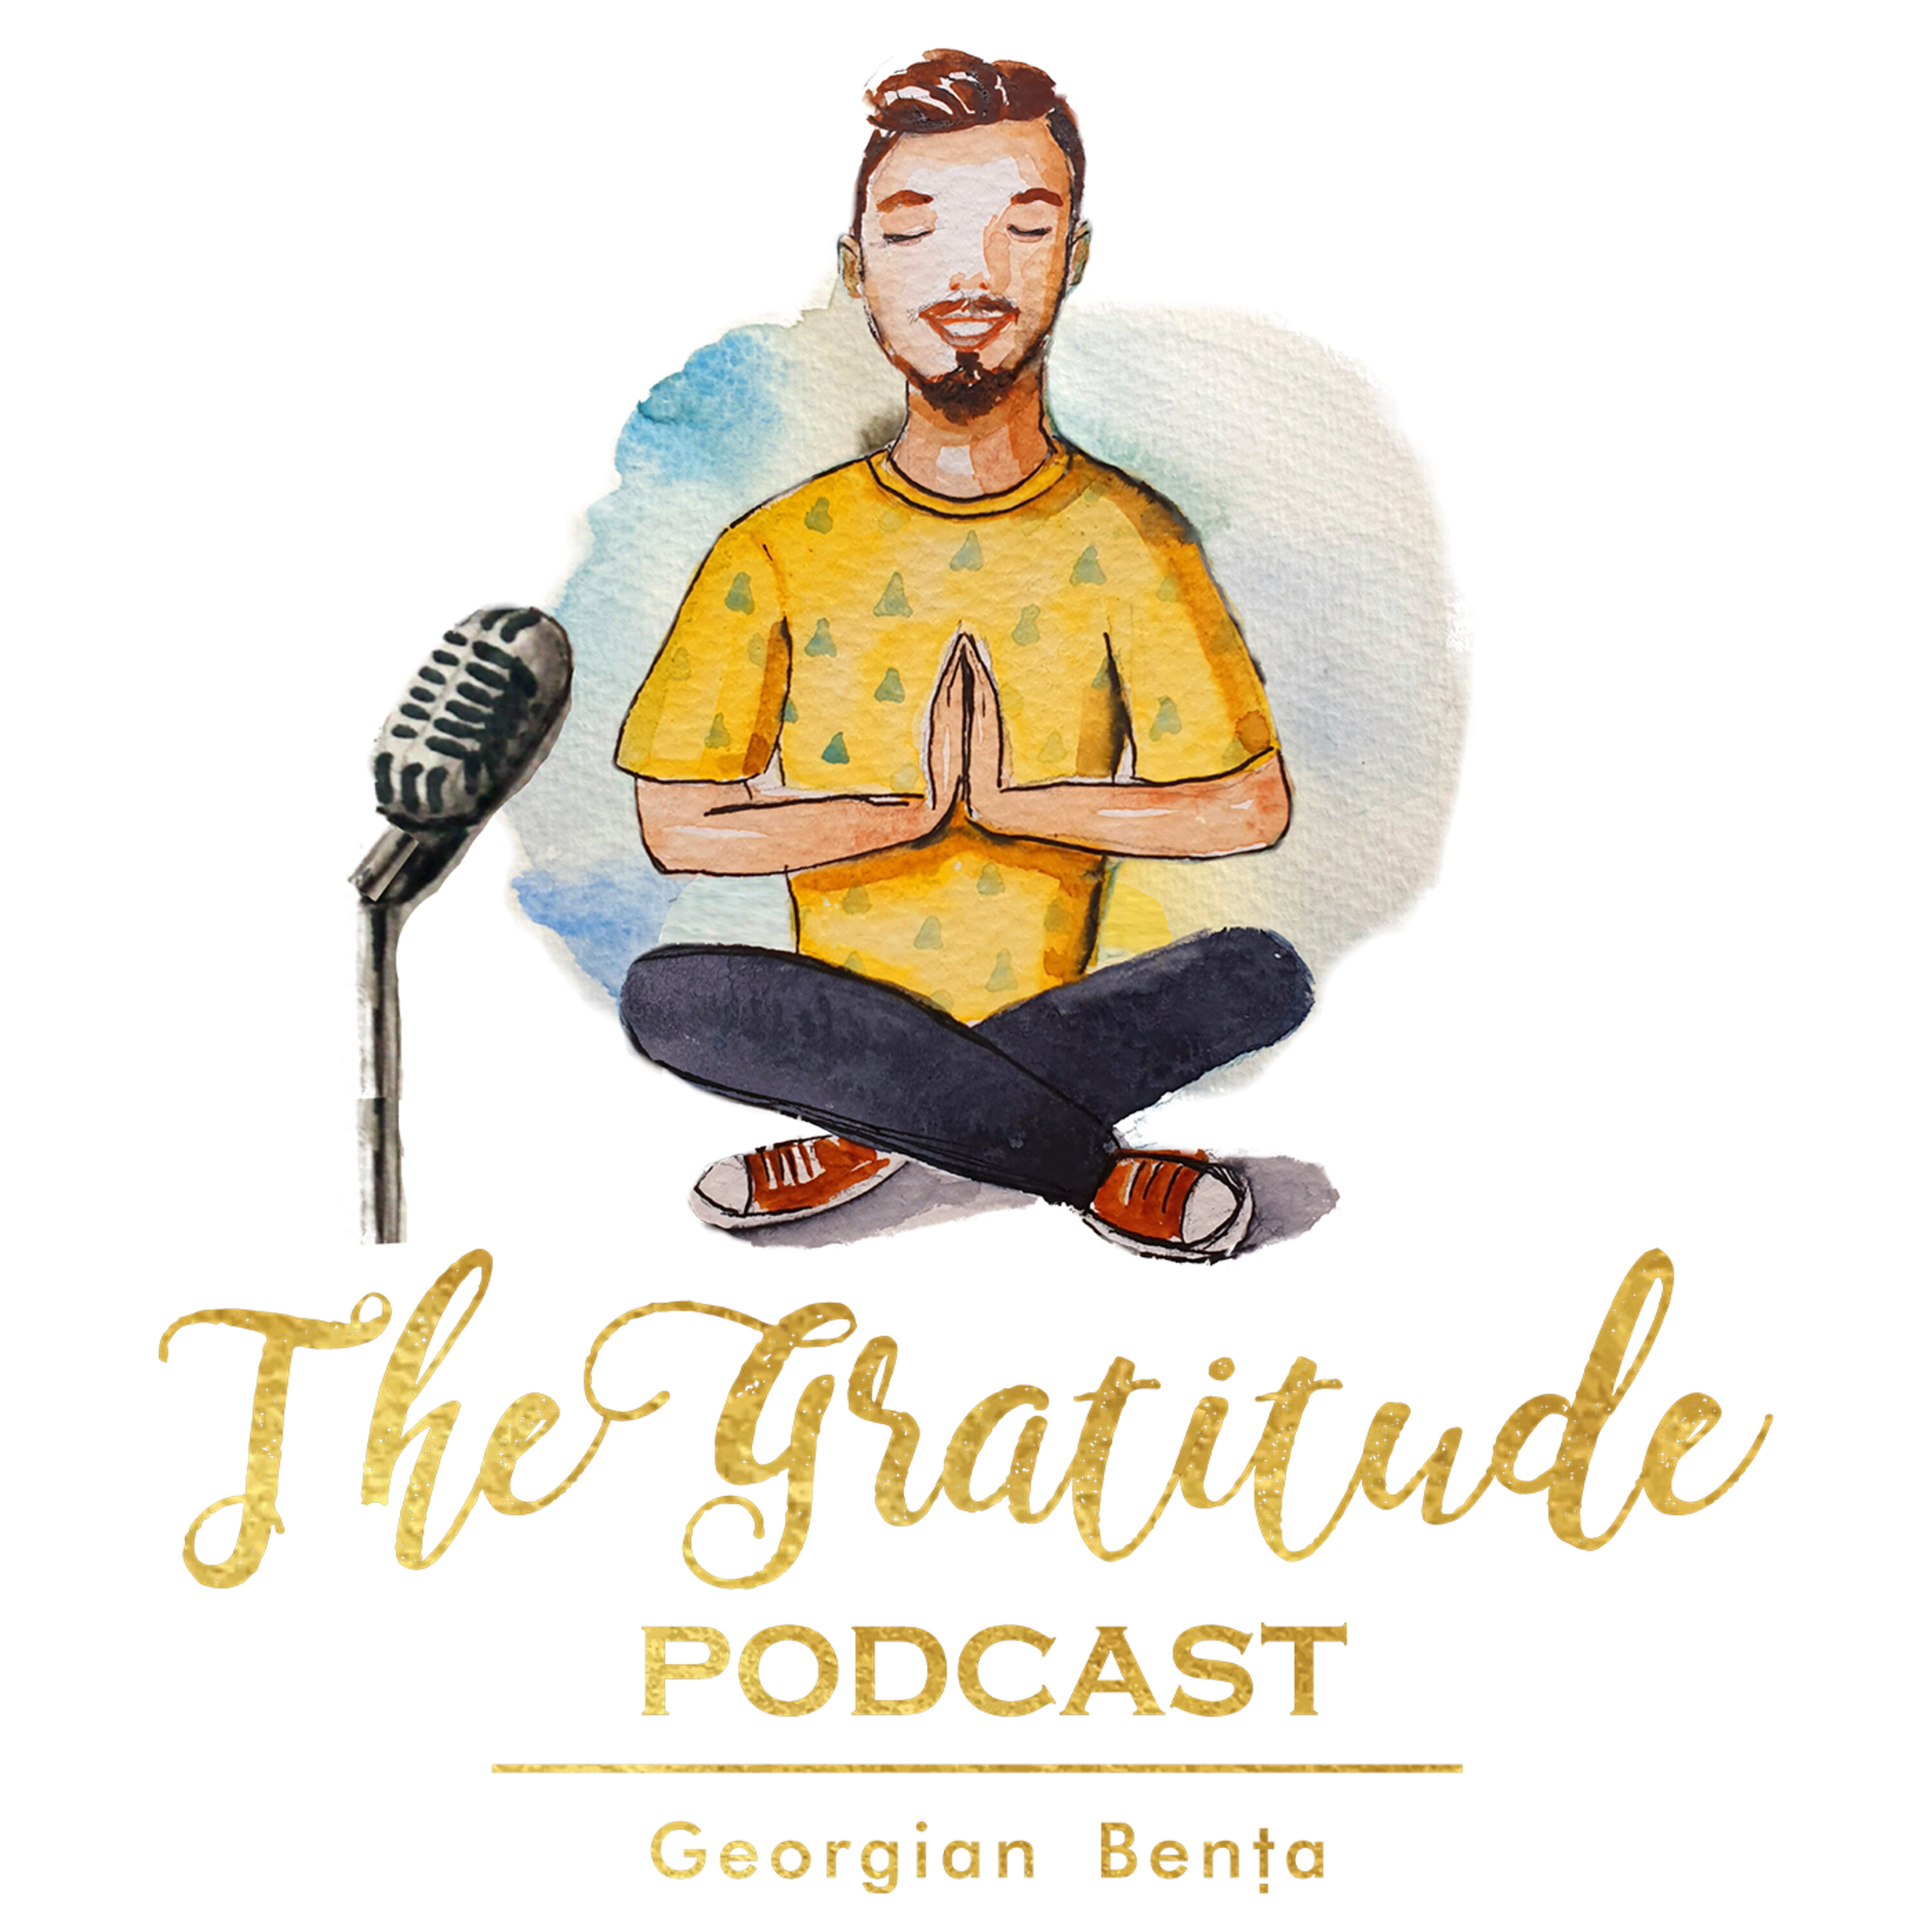 Working With Fear Back Into Gratitude - Kate Swoboda (ep. 678)